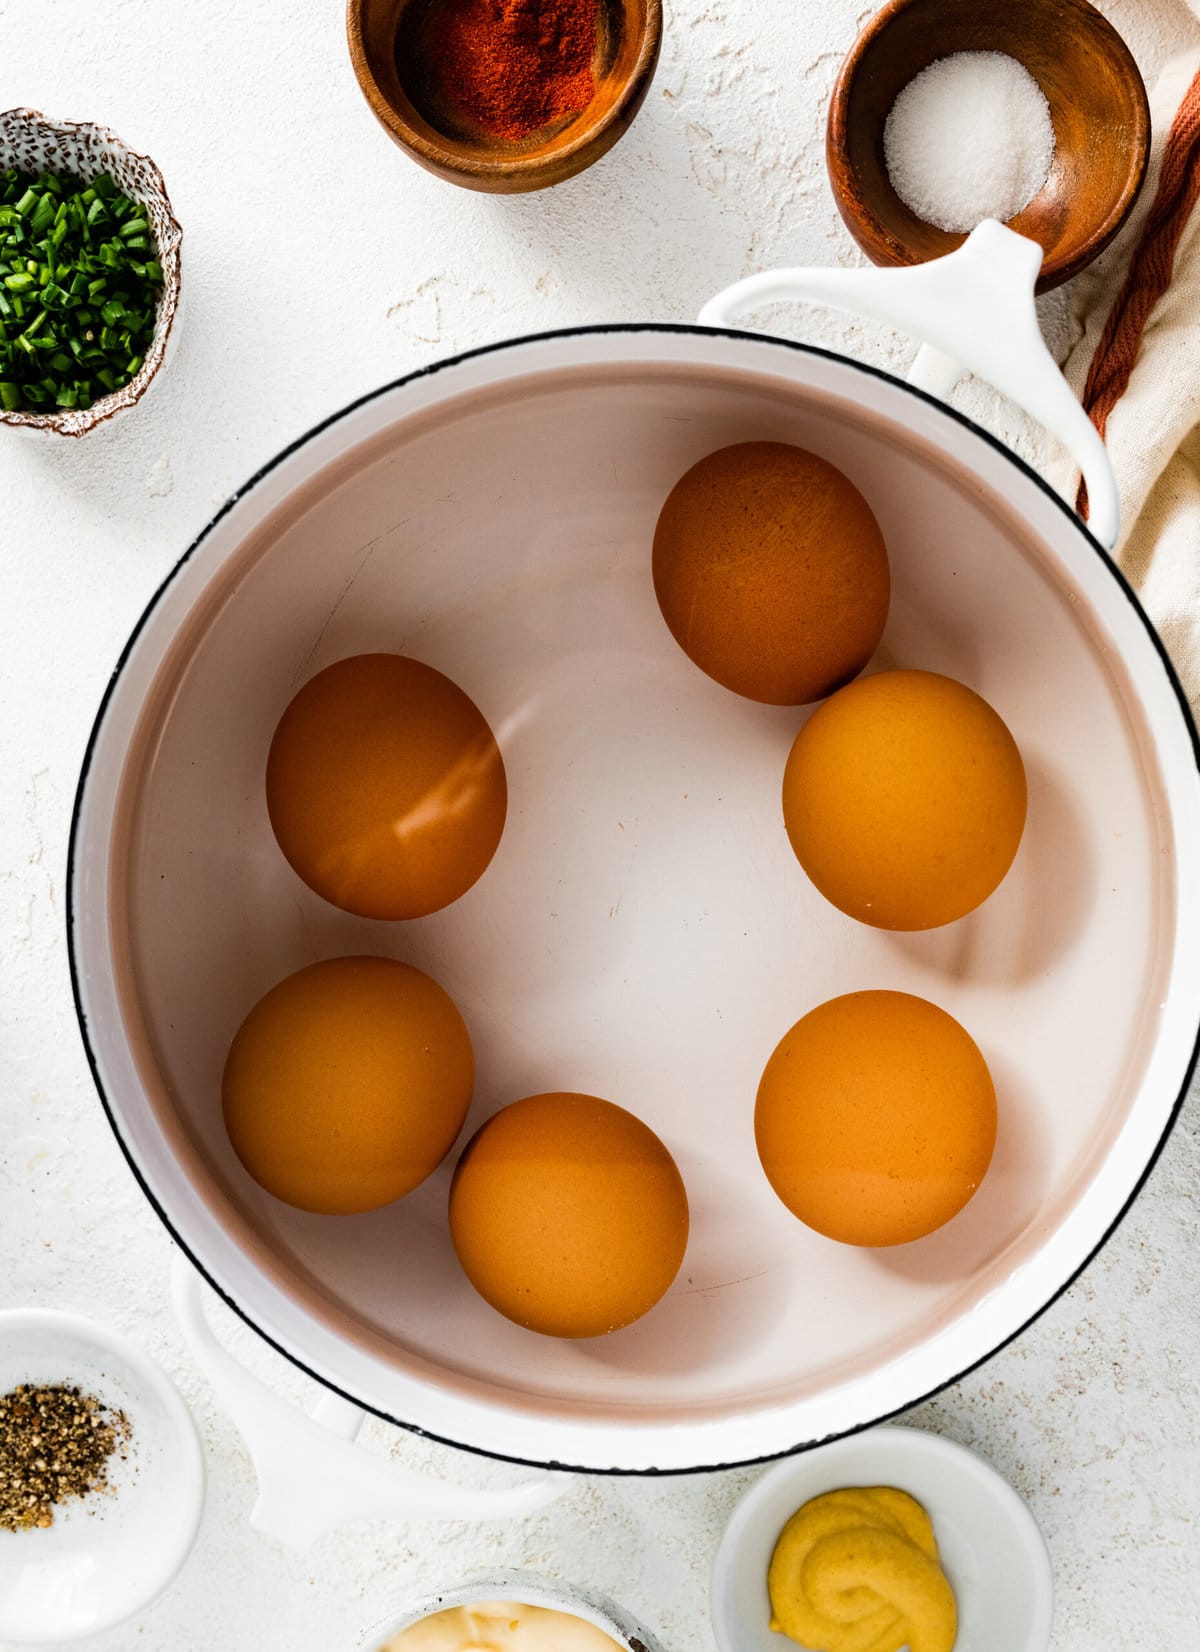 How to make classic deviled eggs step-by-step instructions: boiling the eggs in water.